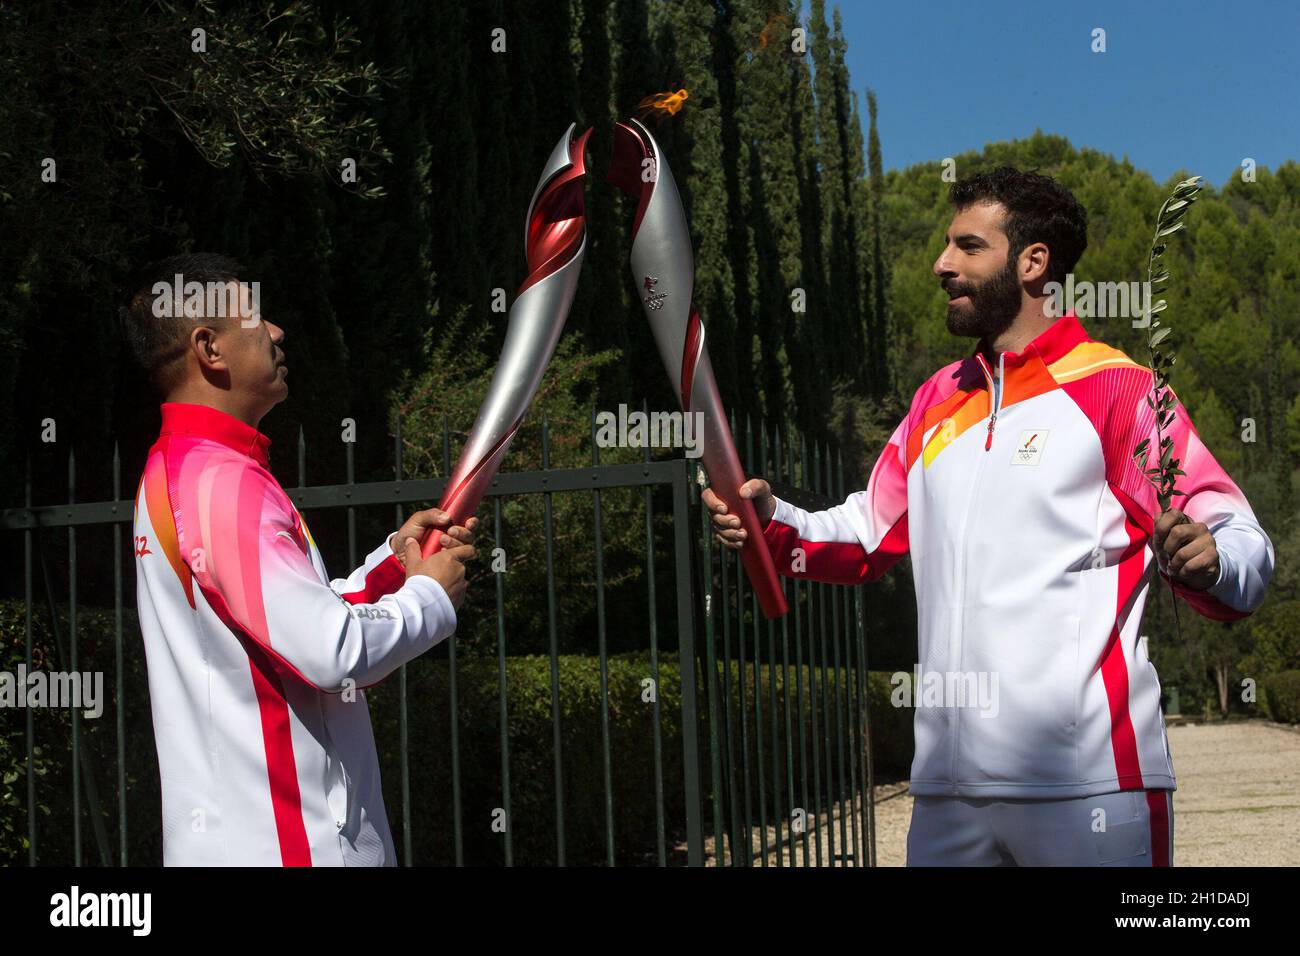 Ancient Olympia, Greece. 18th Oct, 2021. The first torchbearer, Greek  alpine ski racer Ioannis Antoniou (R) passes the flame to the second  torchbearer, Li Jiajun, who is also a former Chinese short